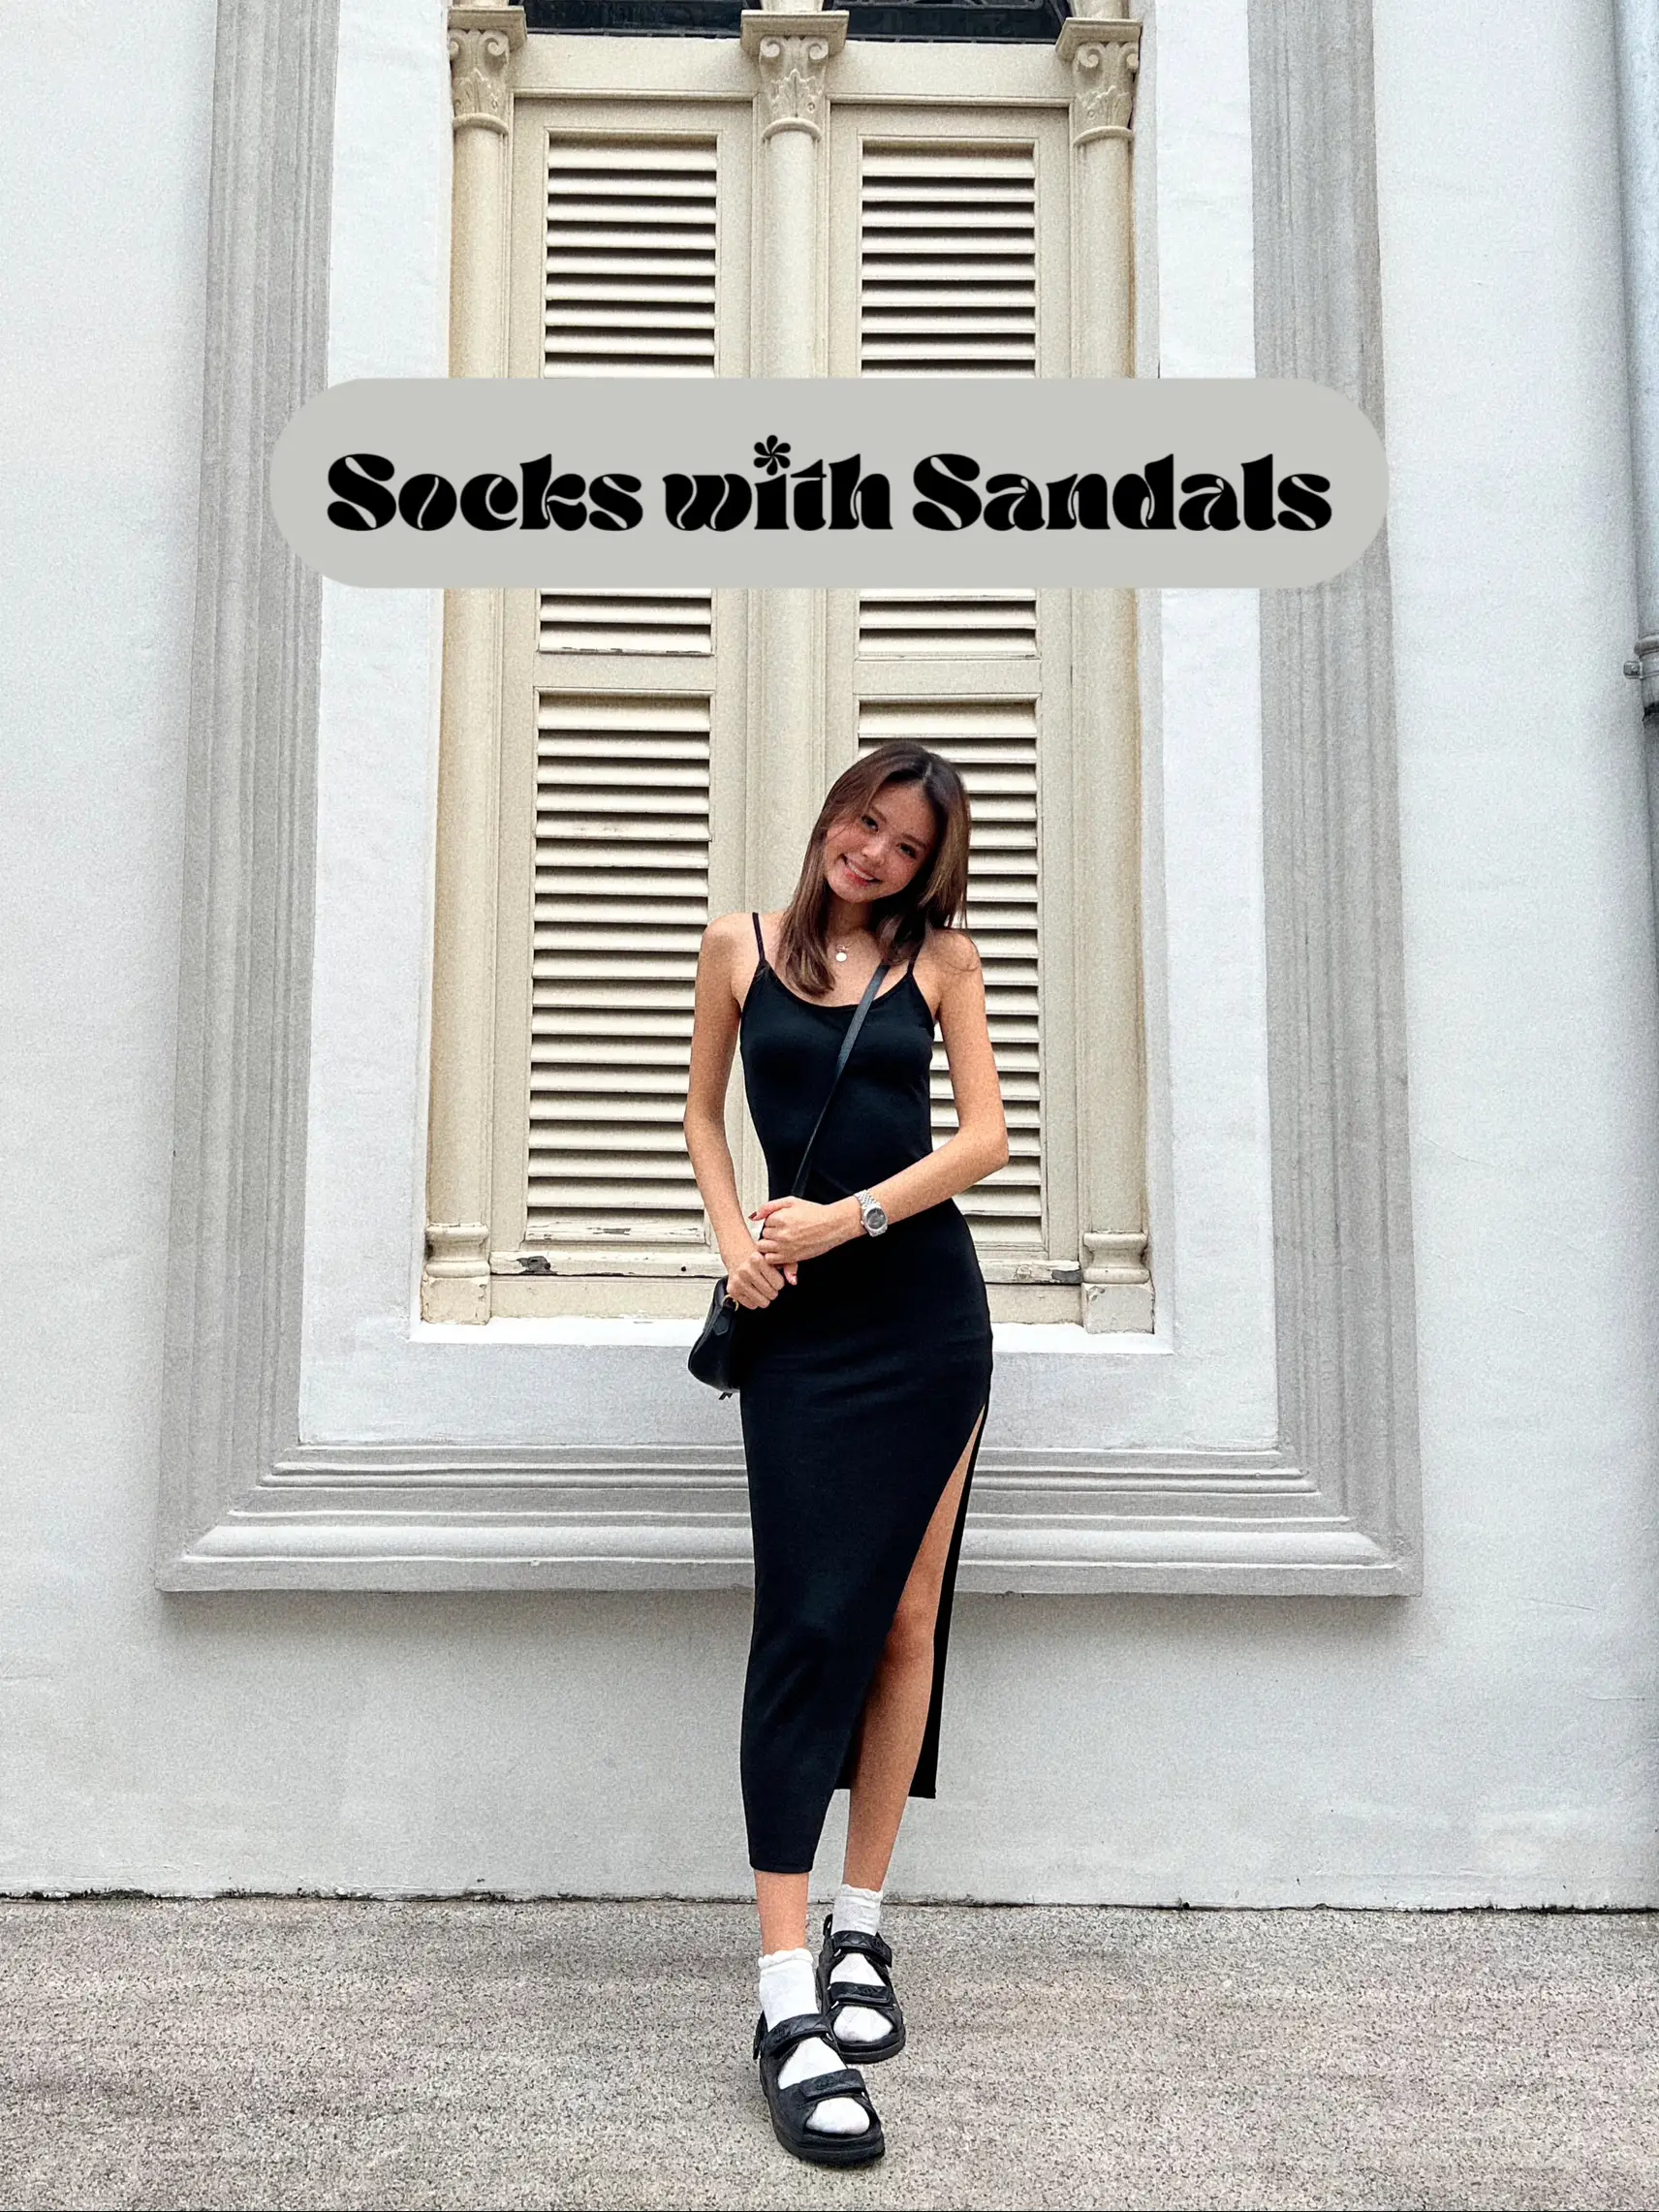 Socks with Sandals?!?! 🧦's images(0)